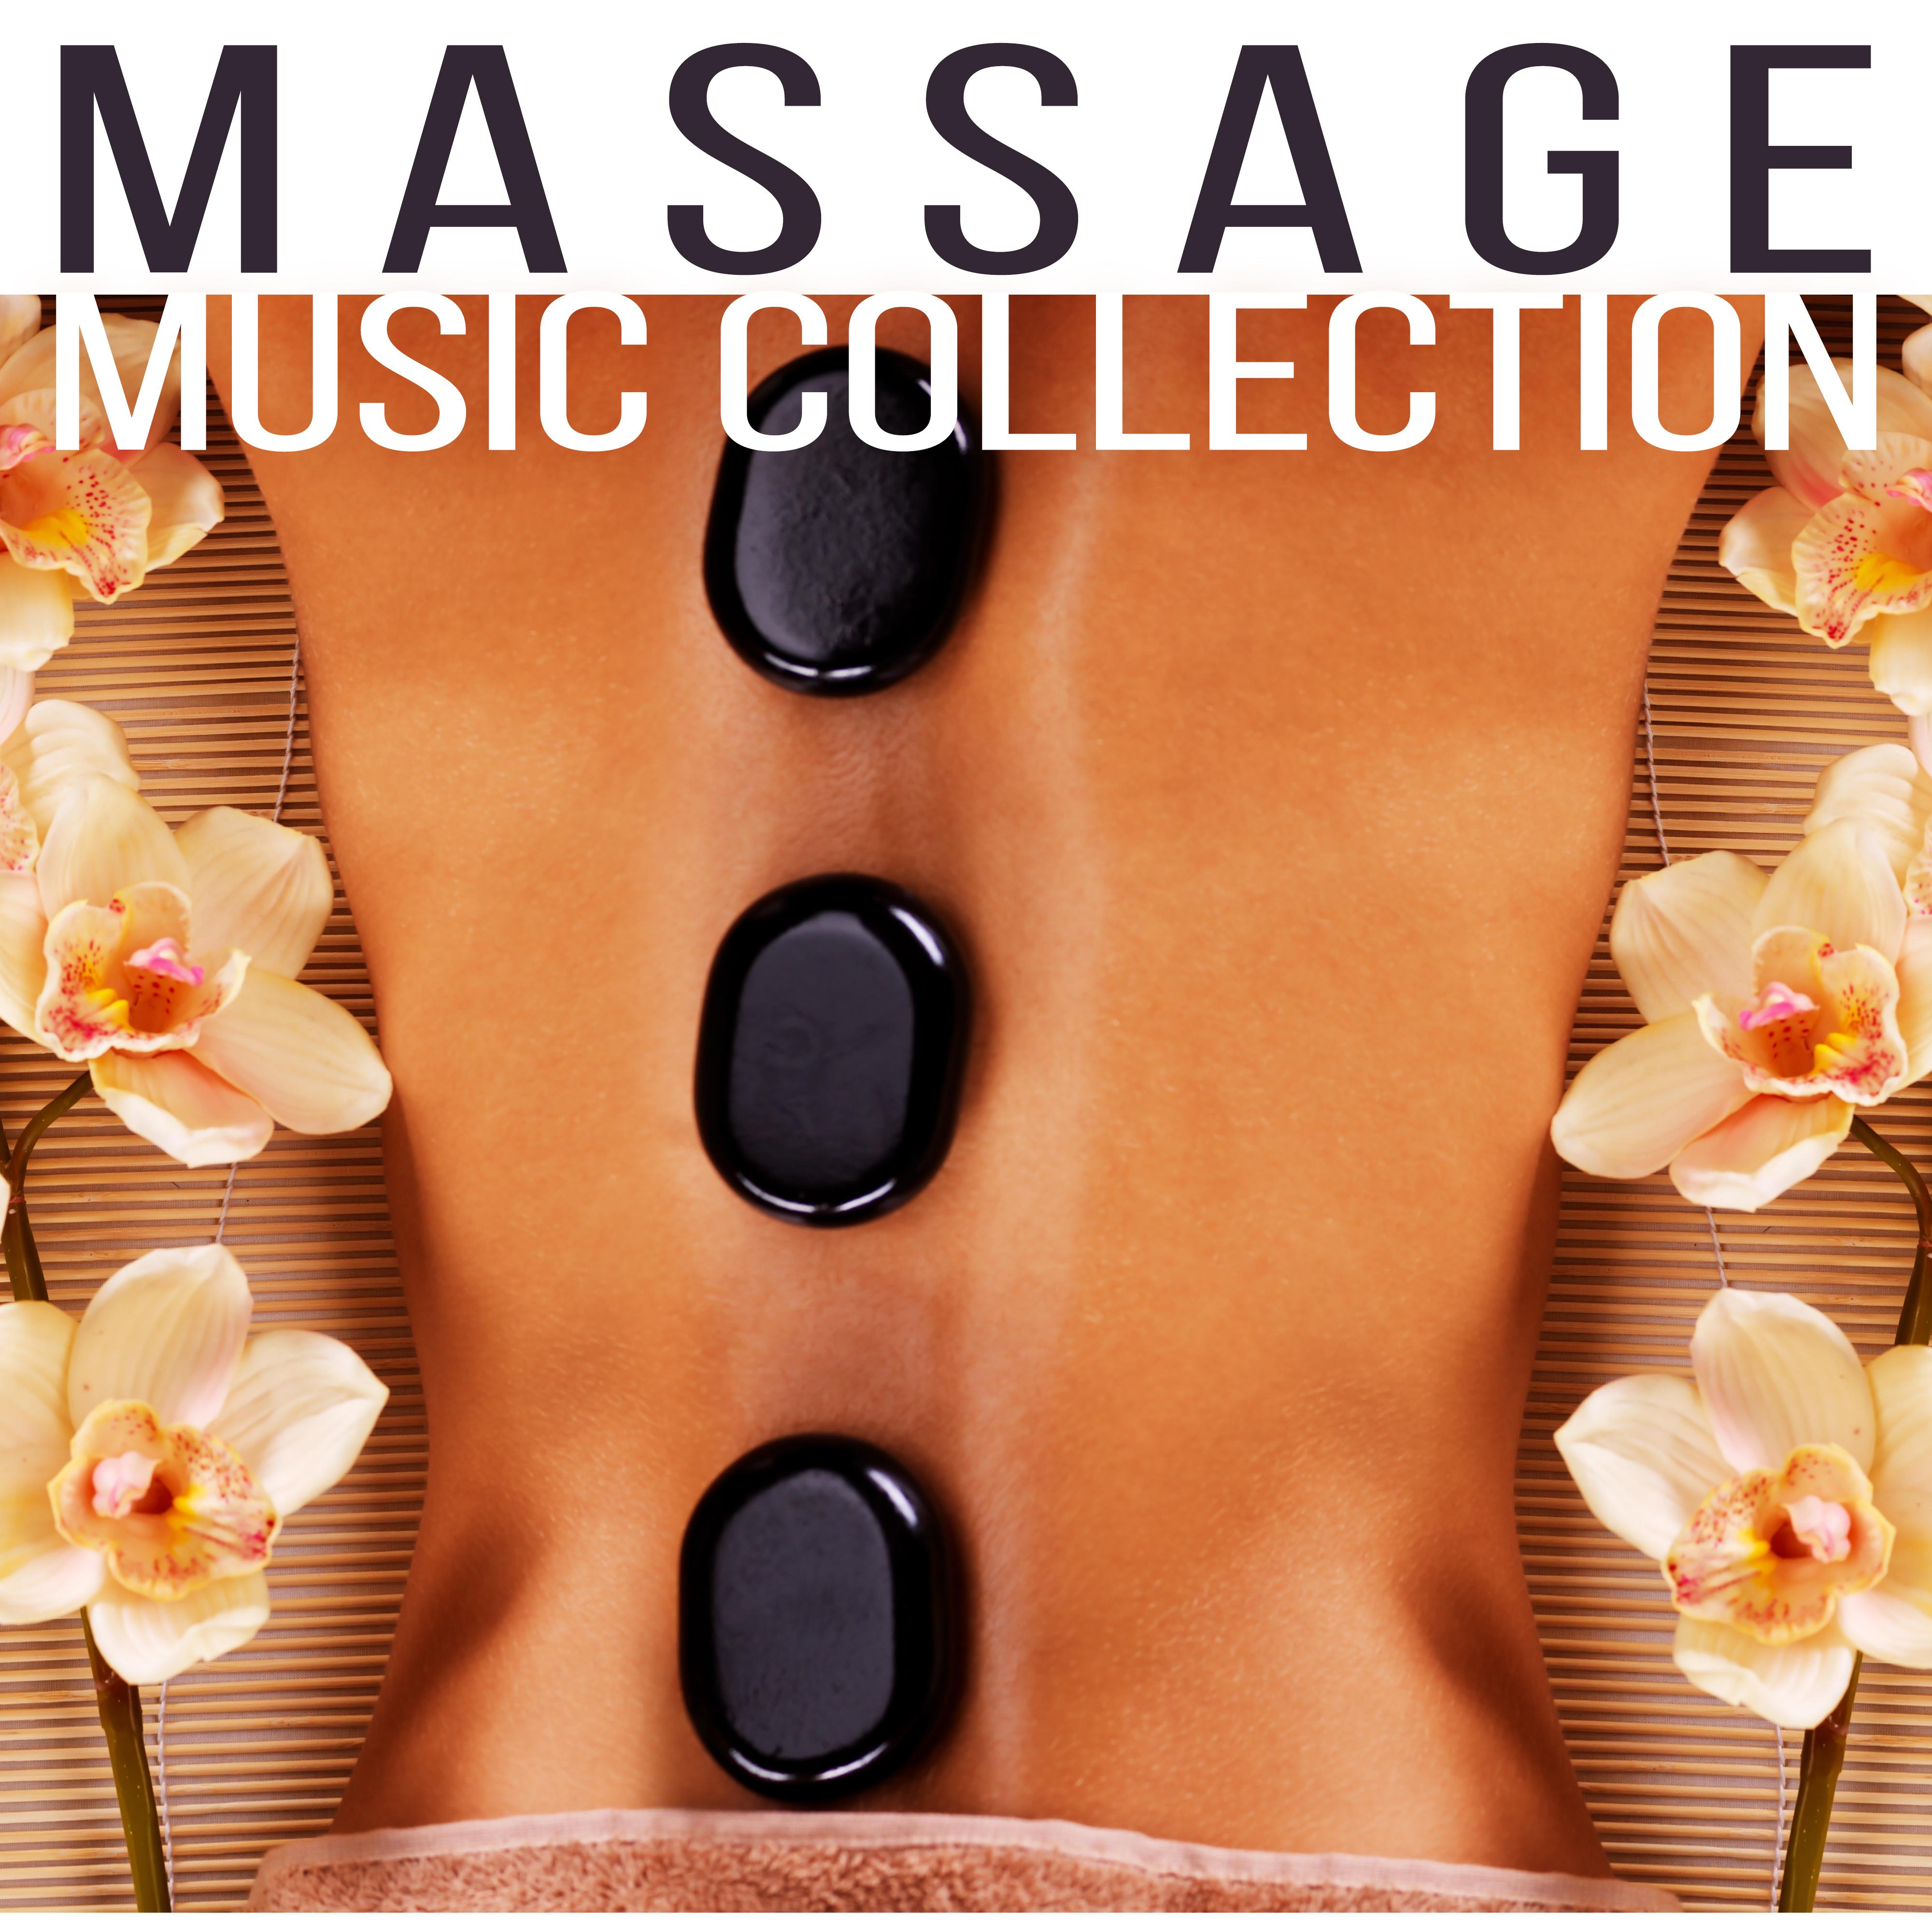 Massage Music Collection - Relaxing Zen Spa Music & Native American Flute for Reiki Healing, Deep Relaxation Meditation